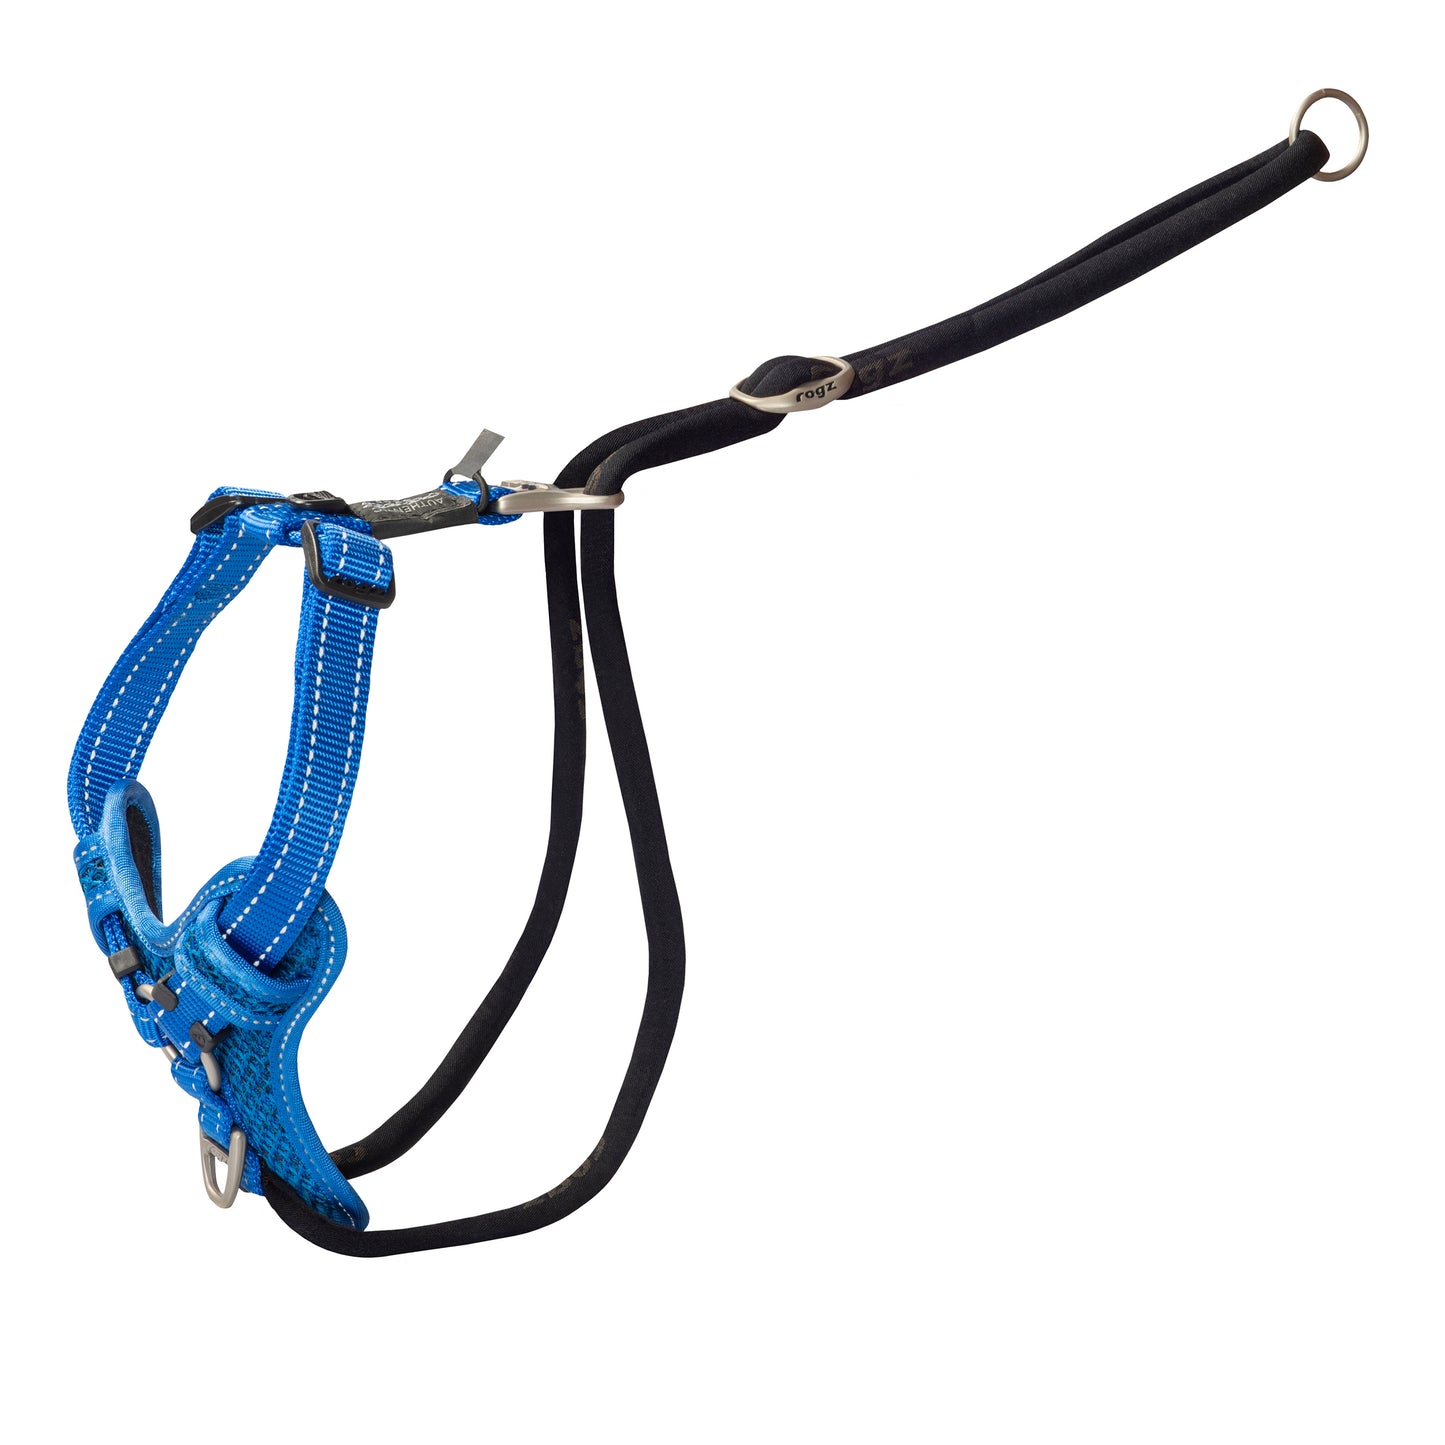 Stop Pull Harness